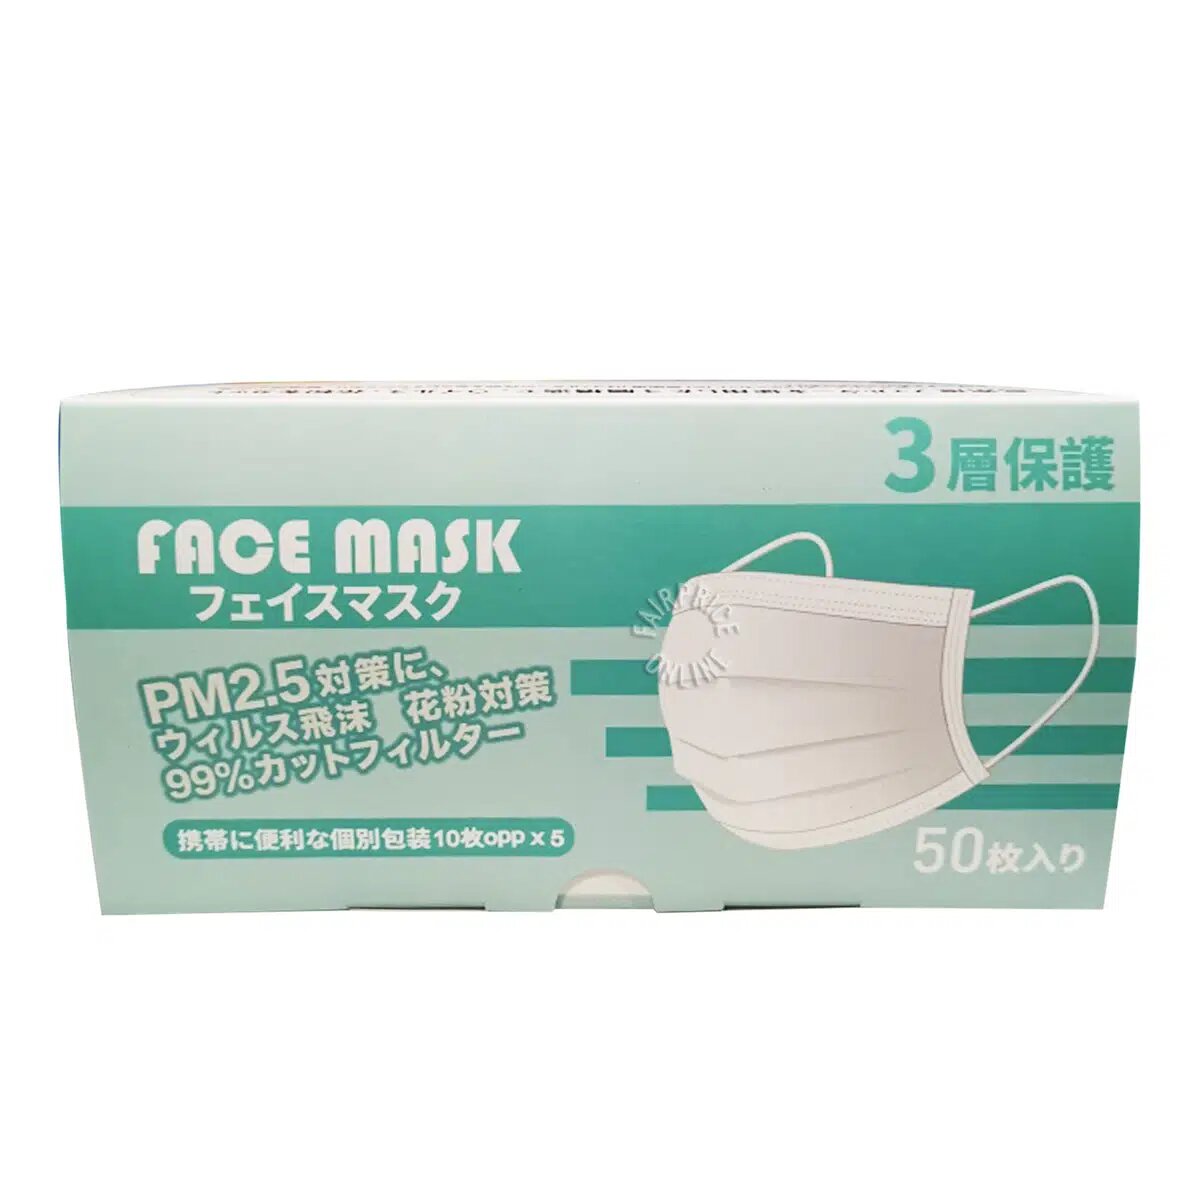 Shanlee 3 Ply Face Mask (White)